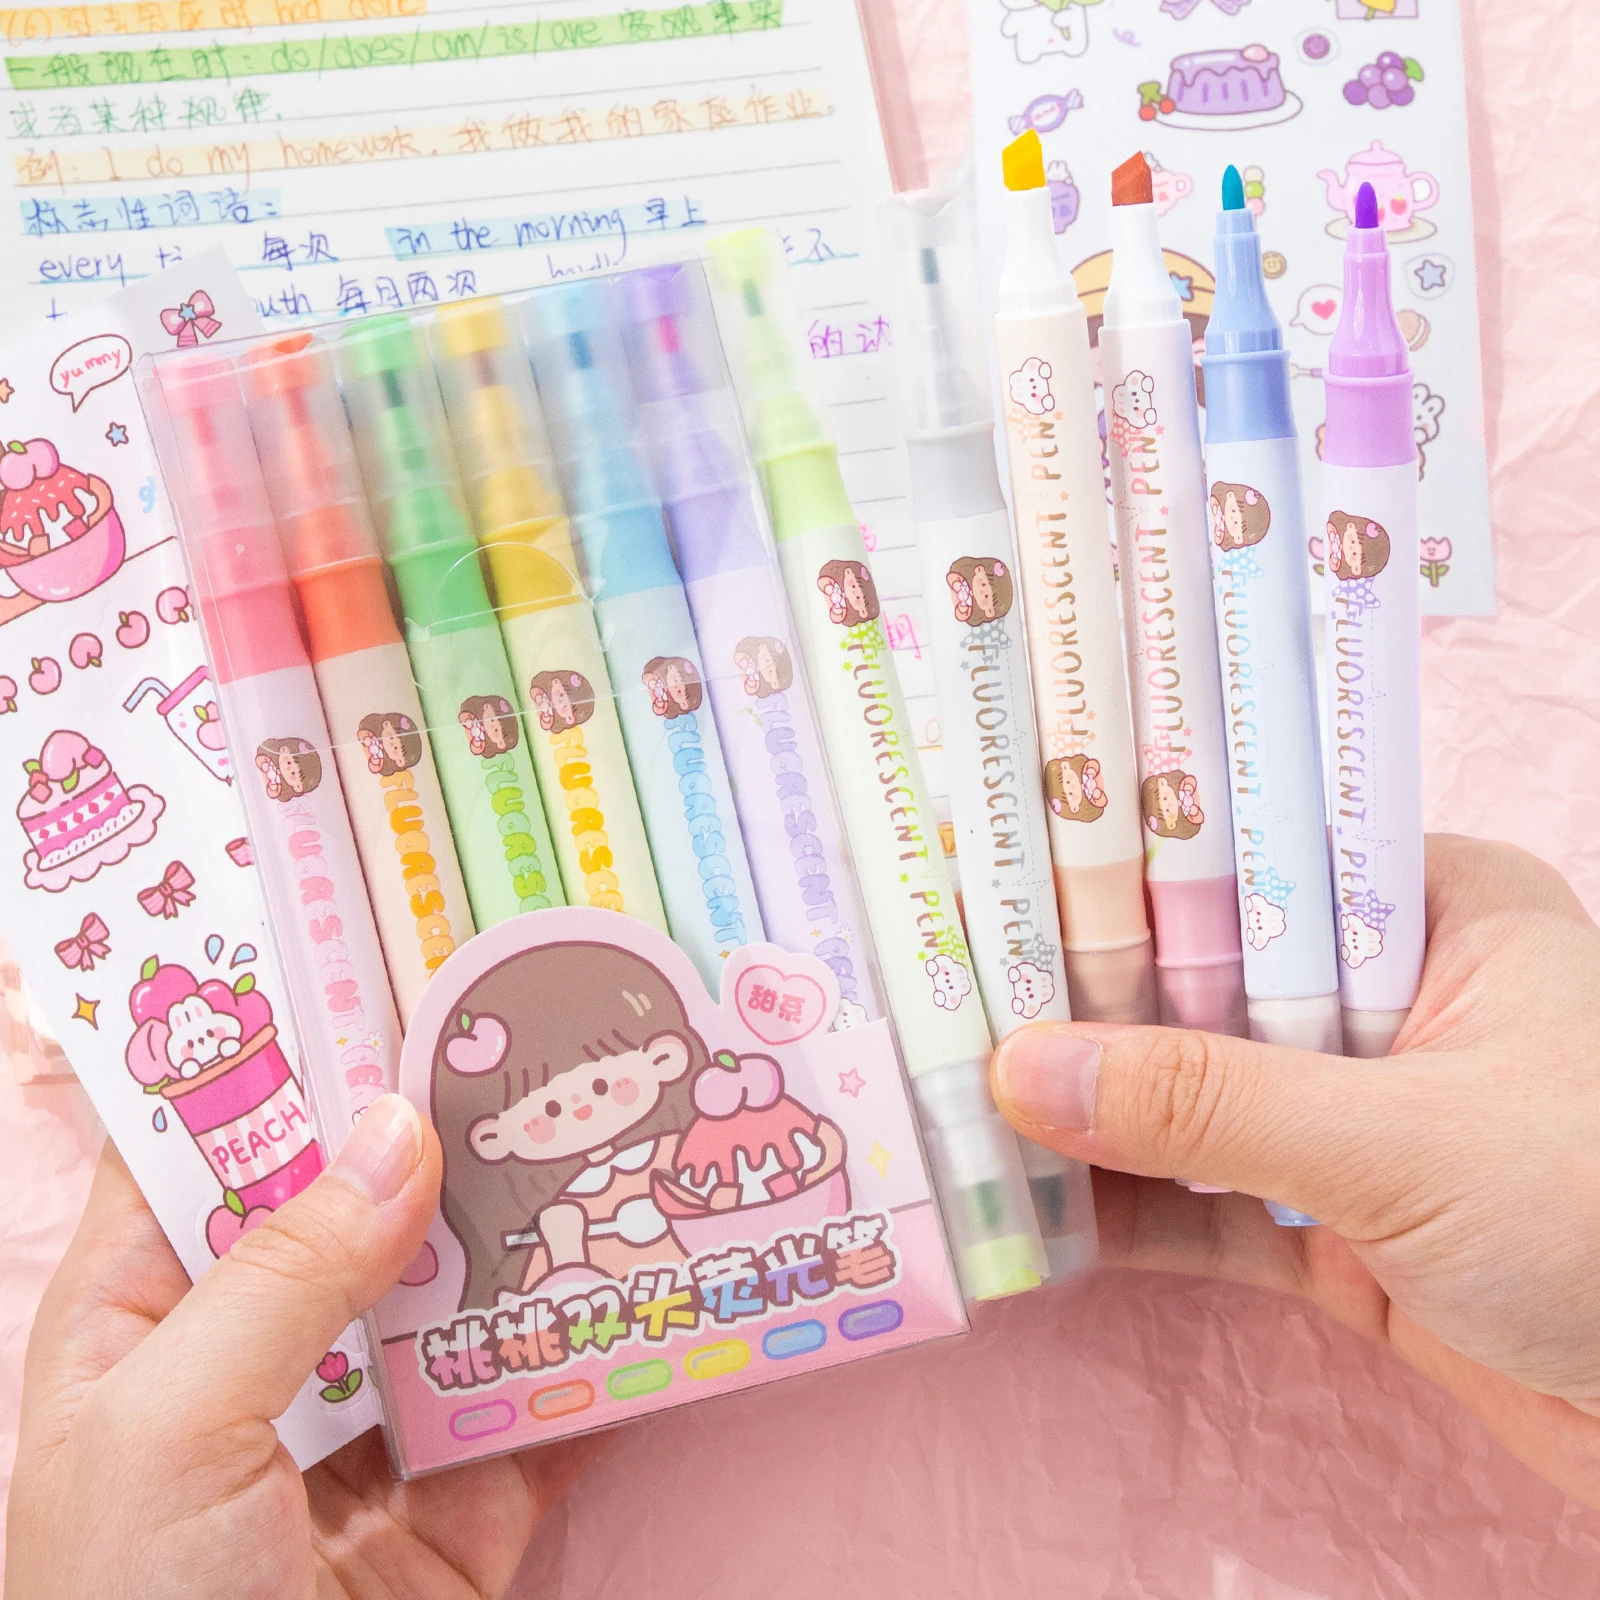 6PCS Pastel Highlighters Fluorescent Pen School Stationery Kawaiii office Supplies Marker Pens Colored Markers Cute Drawing Pens pack of 18 and 24 pens bic kids plastidecor erasable hands pastel paint for creativity drawing hobby art supplies stationery